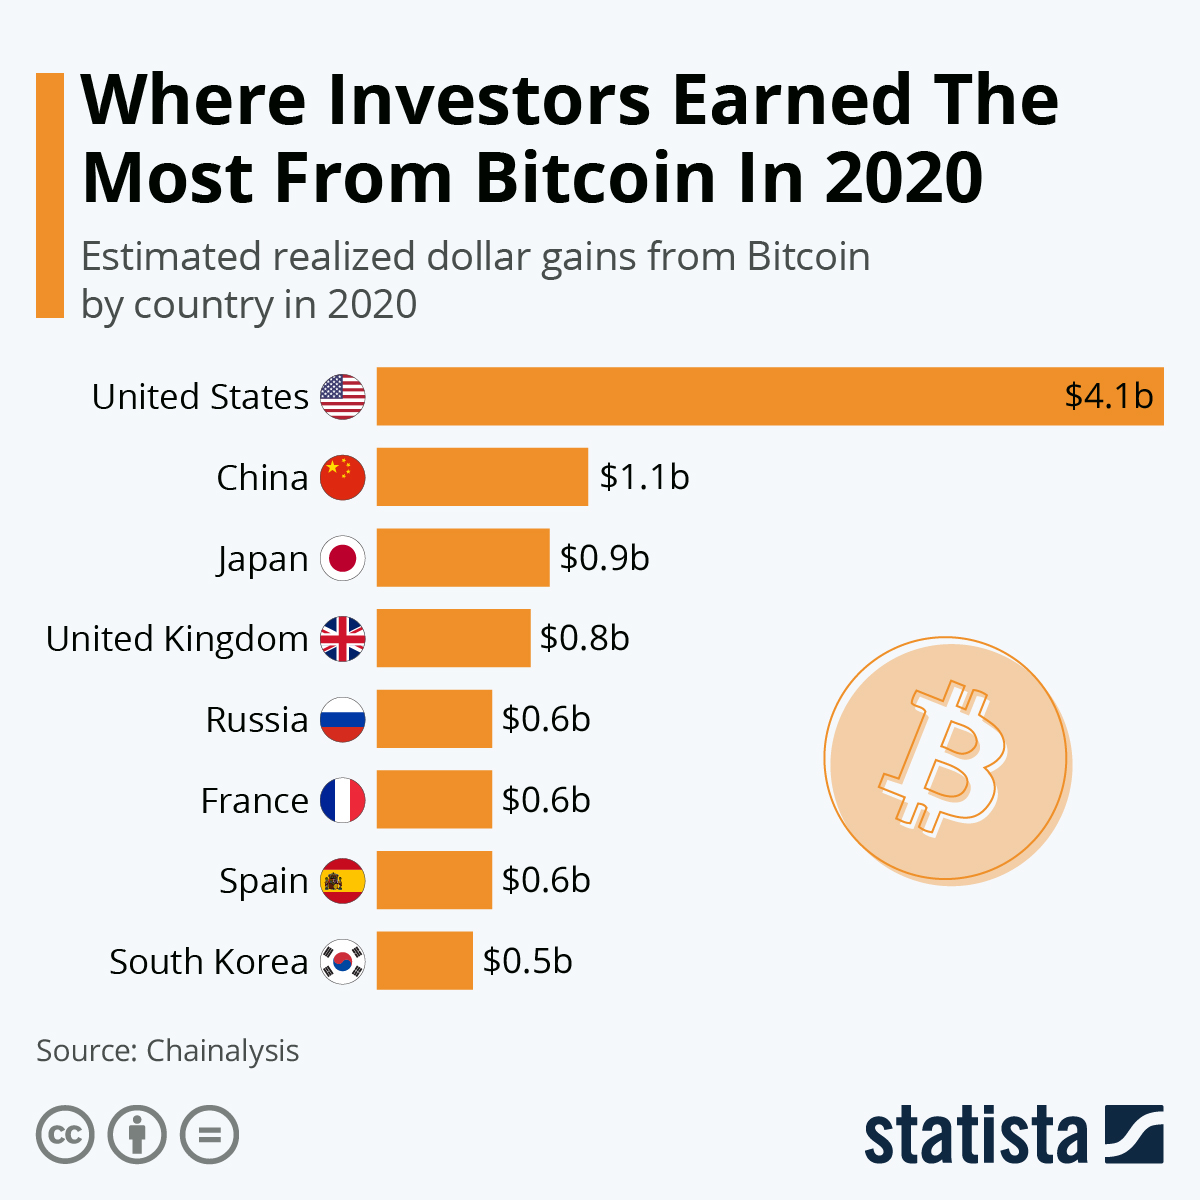 Who Owns the Most Bitcoin? Largest BTC Holders ()